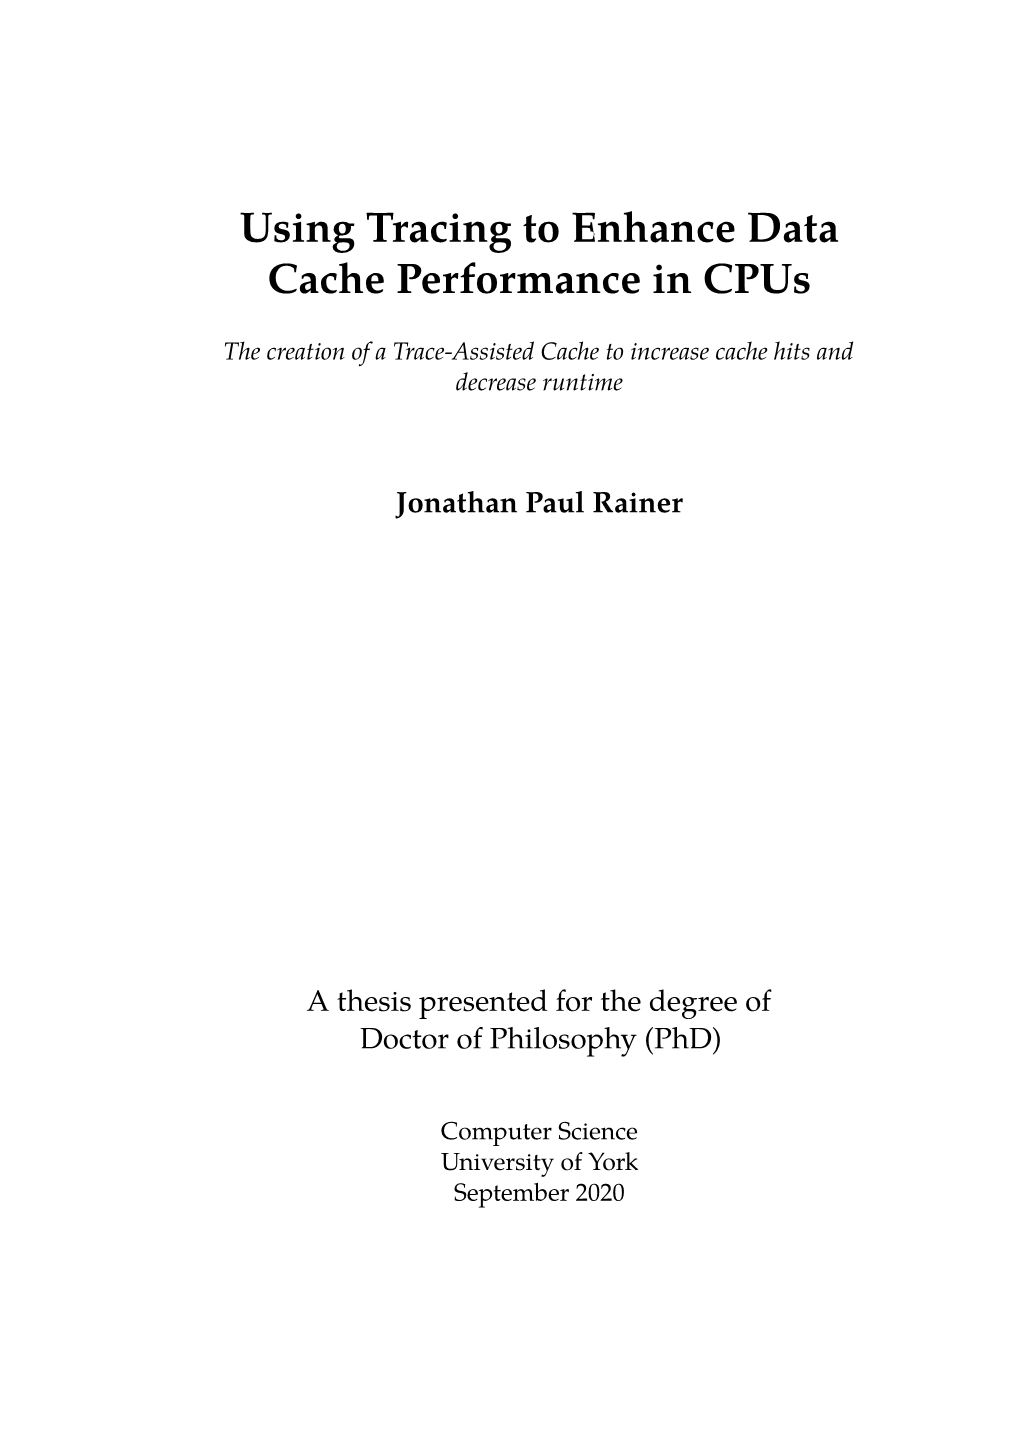 Using Tracing to Enhance Data Cache Performance in Cpus